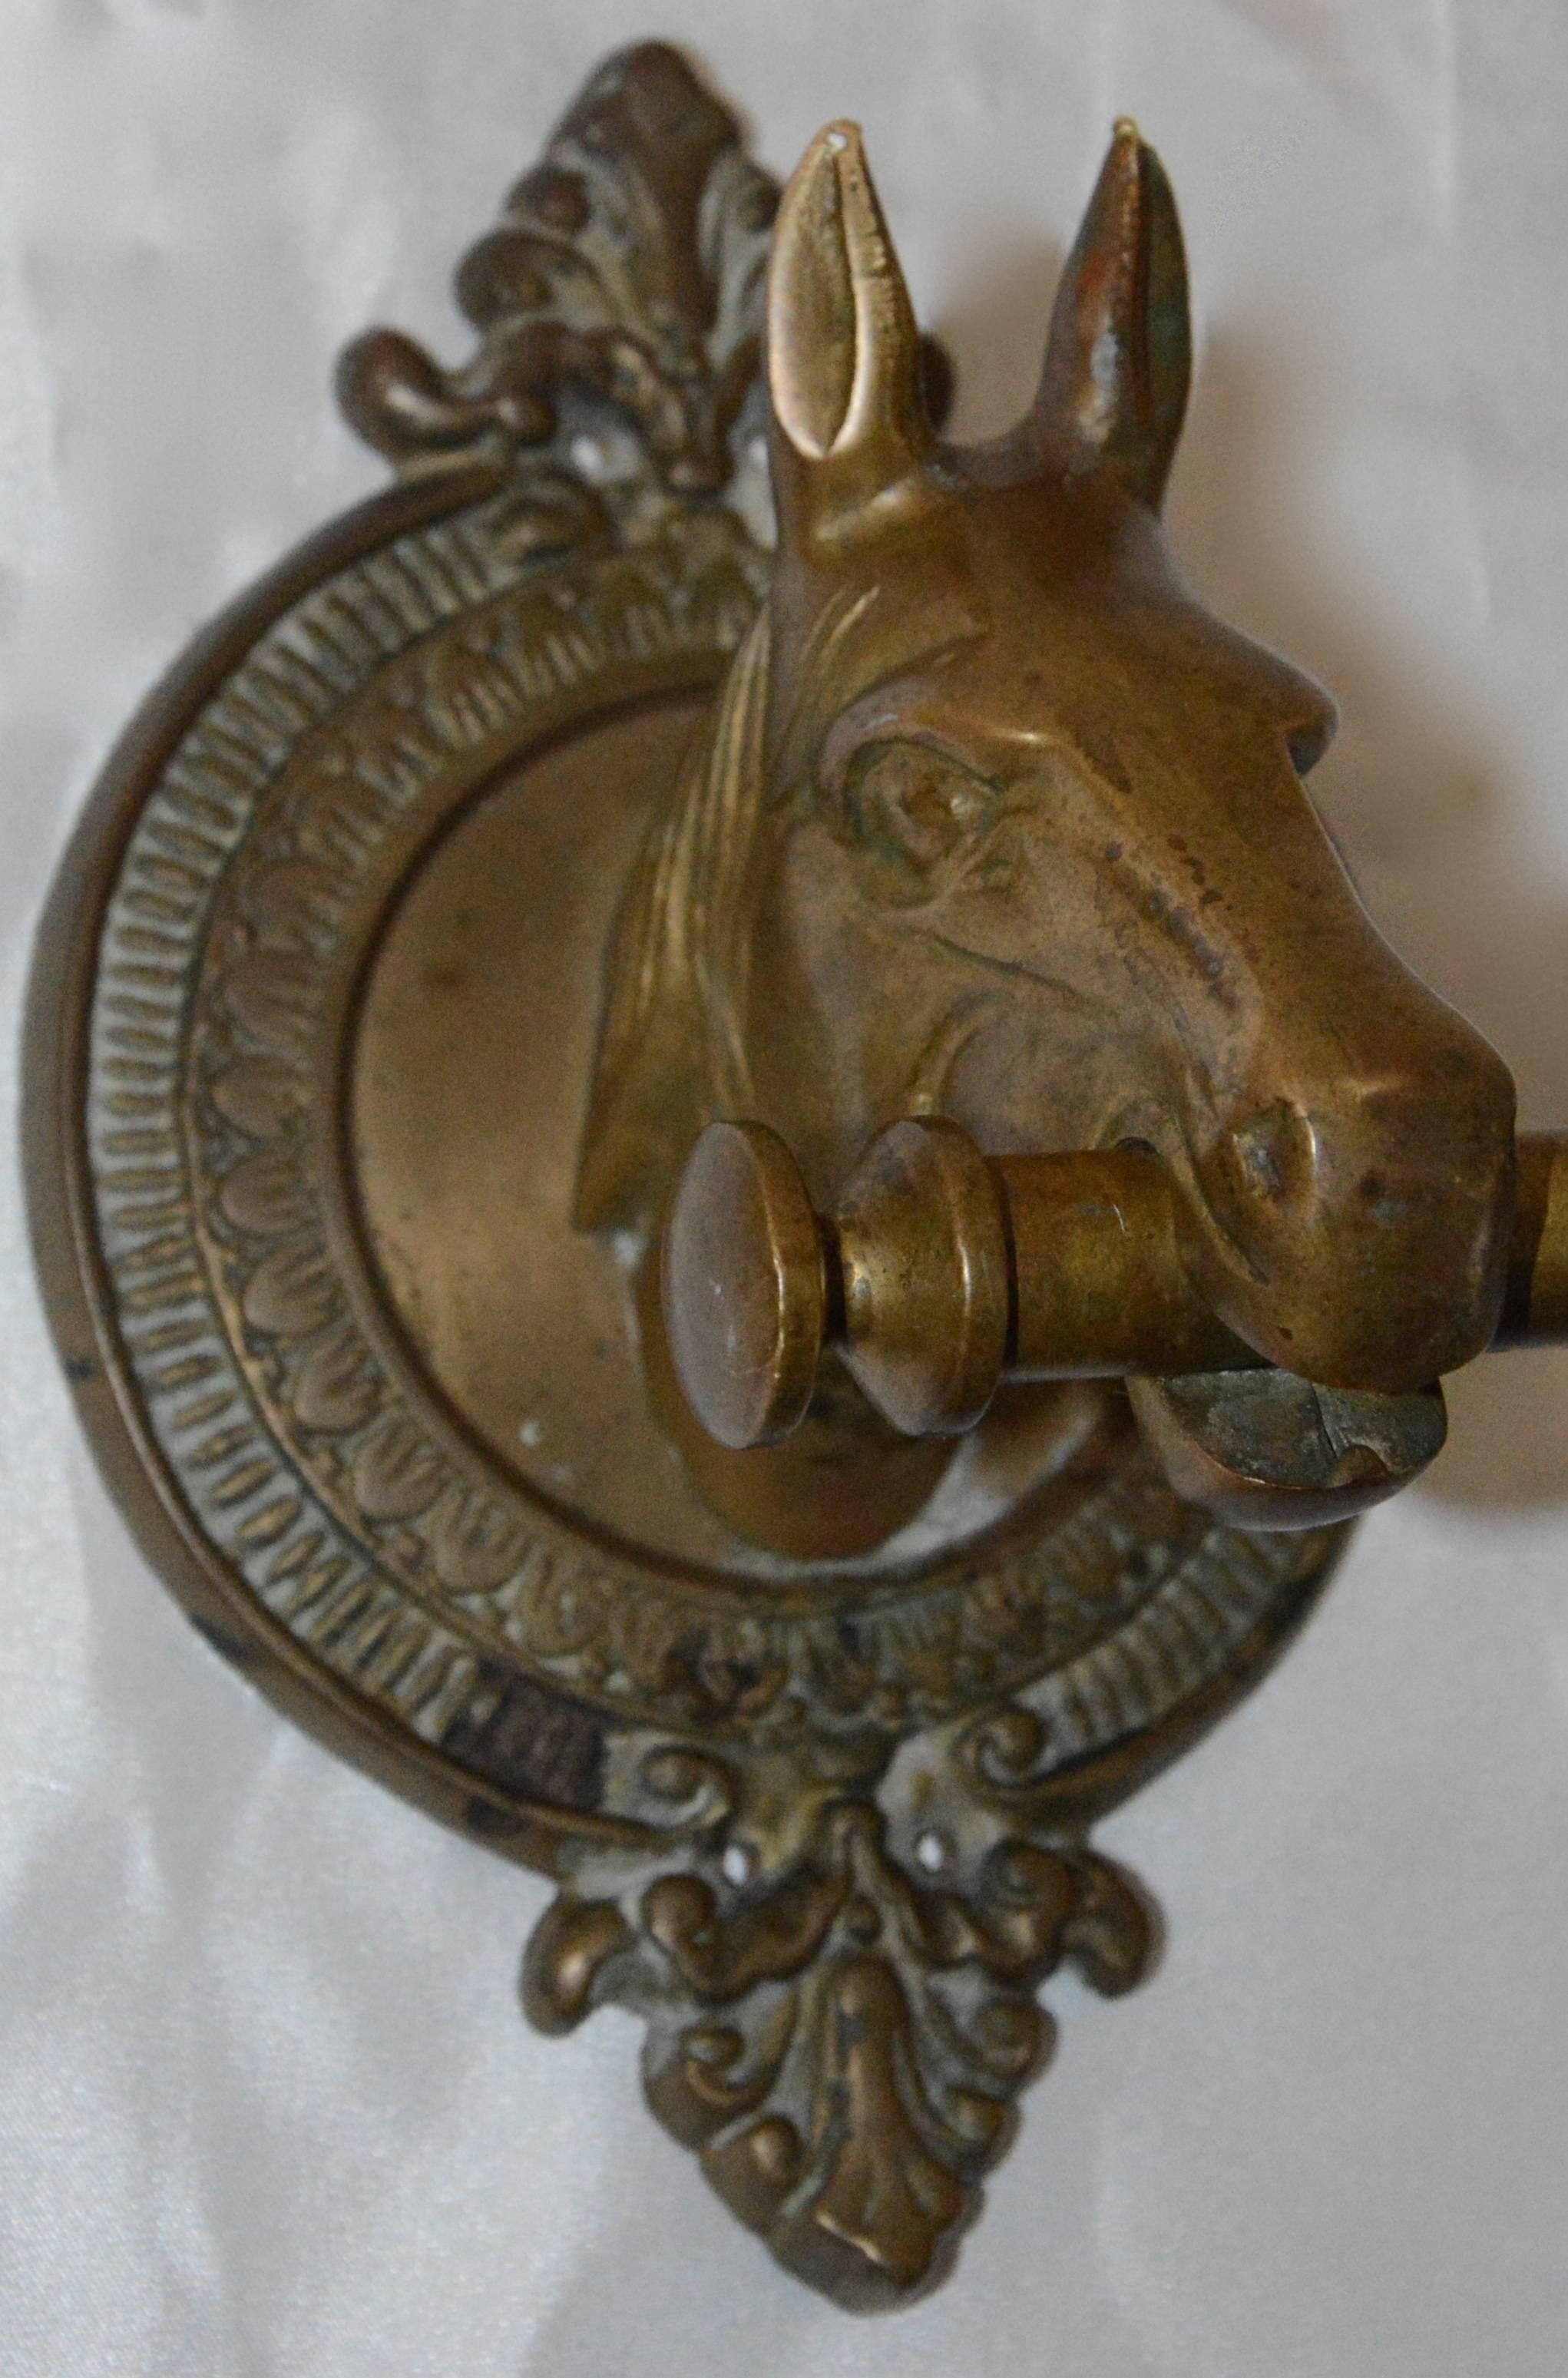 Featured is a heavy brass horse head coat rack. This piece features two figural horse heads mounted to wall plaques with a long rod between them held in their mouths. The cast brass has nice details. Five coat hooks are secured to the rod.